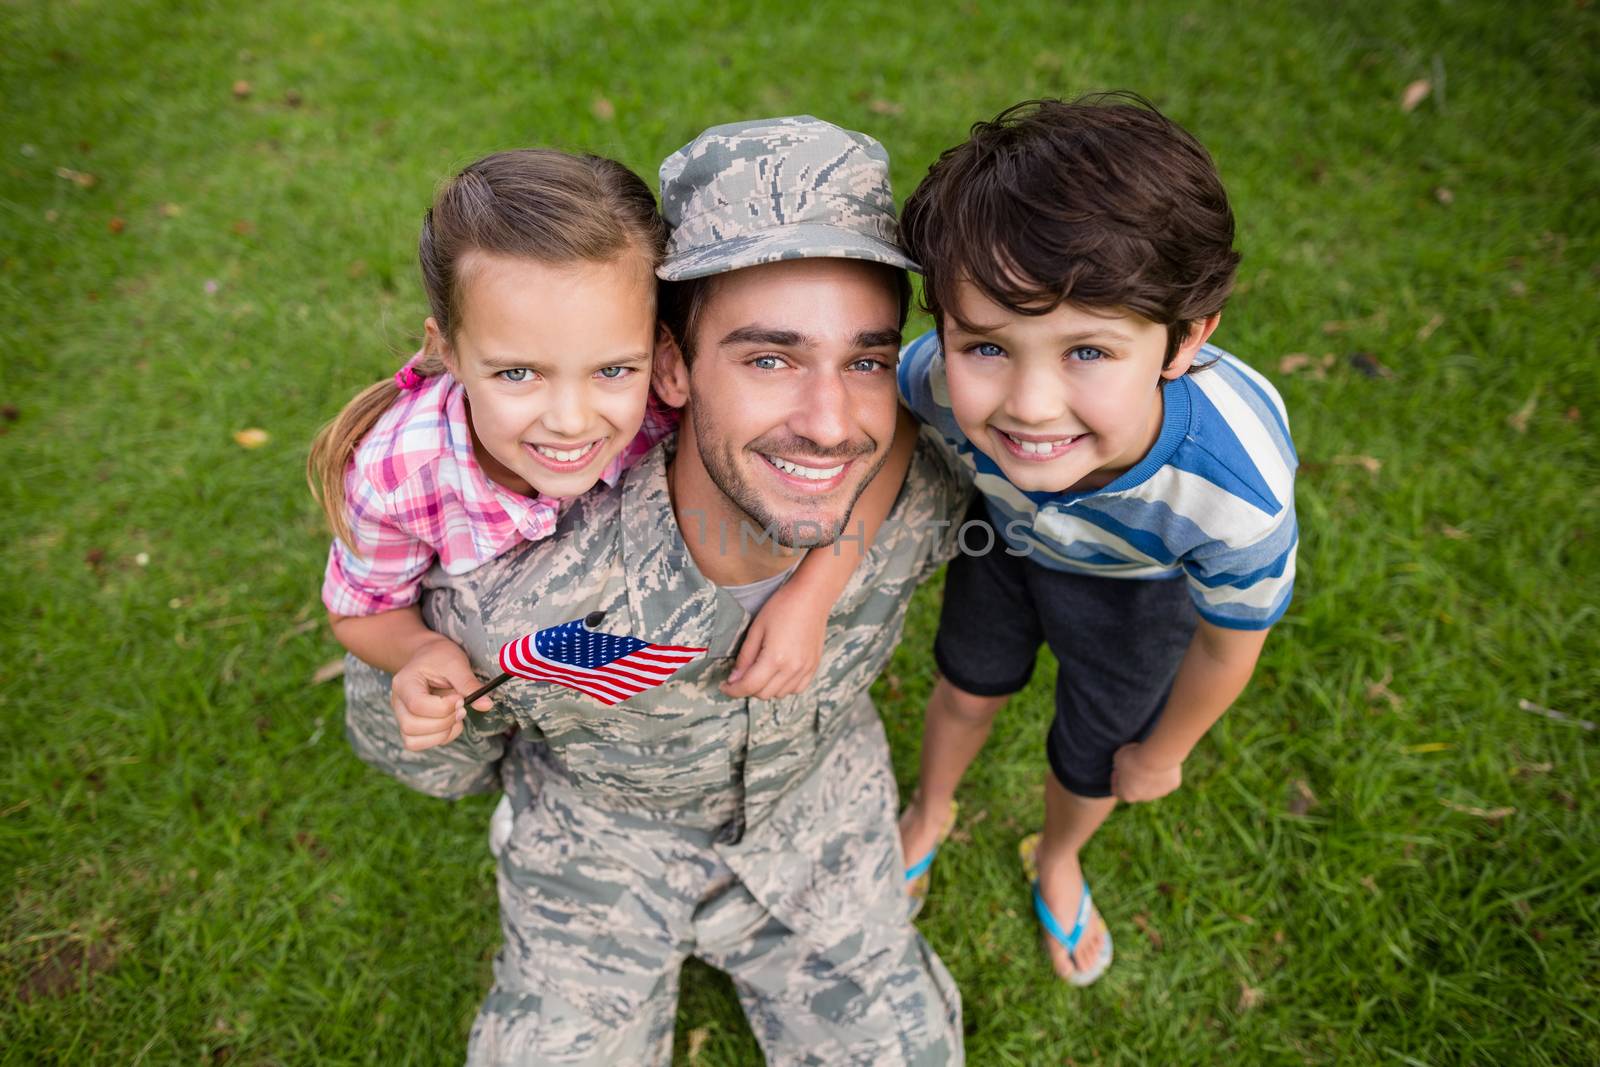 Happy soldier reunited with his son and daughter in park by Wavebreakmedia